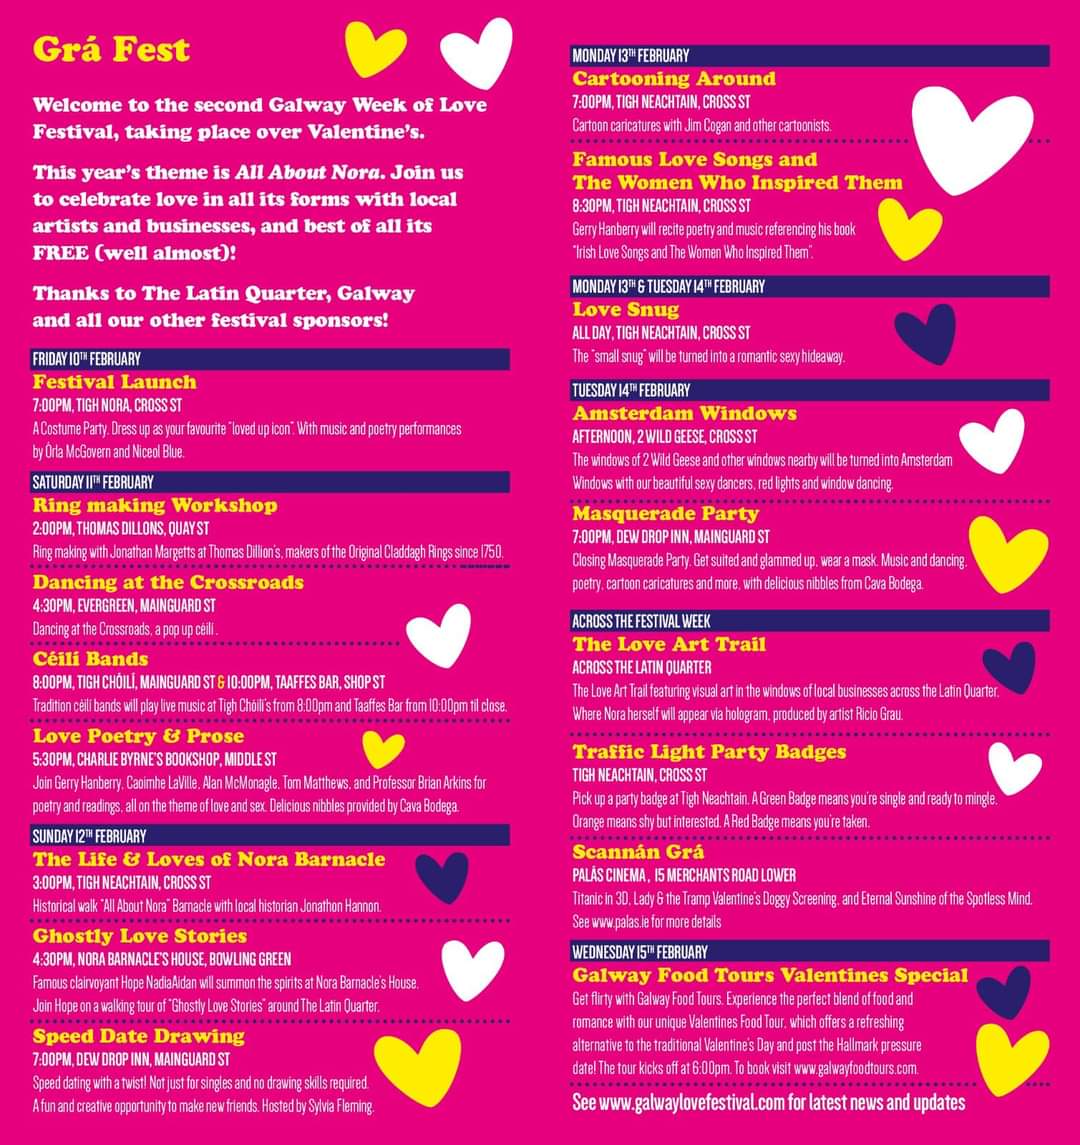 #GalwayLoveFestival kicks off today. Love is definitely in the air. Check out its great programme of events ❤️ #Galway #VisitGalway #ThisIsGalway #DiscoverGalway #GalwayTourism #GalwayFestival #Ireland #VisitIreland #FáilteIreland #DiscoverIreland #IrishFestival #LoveFestival